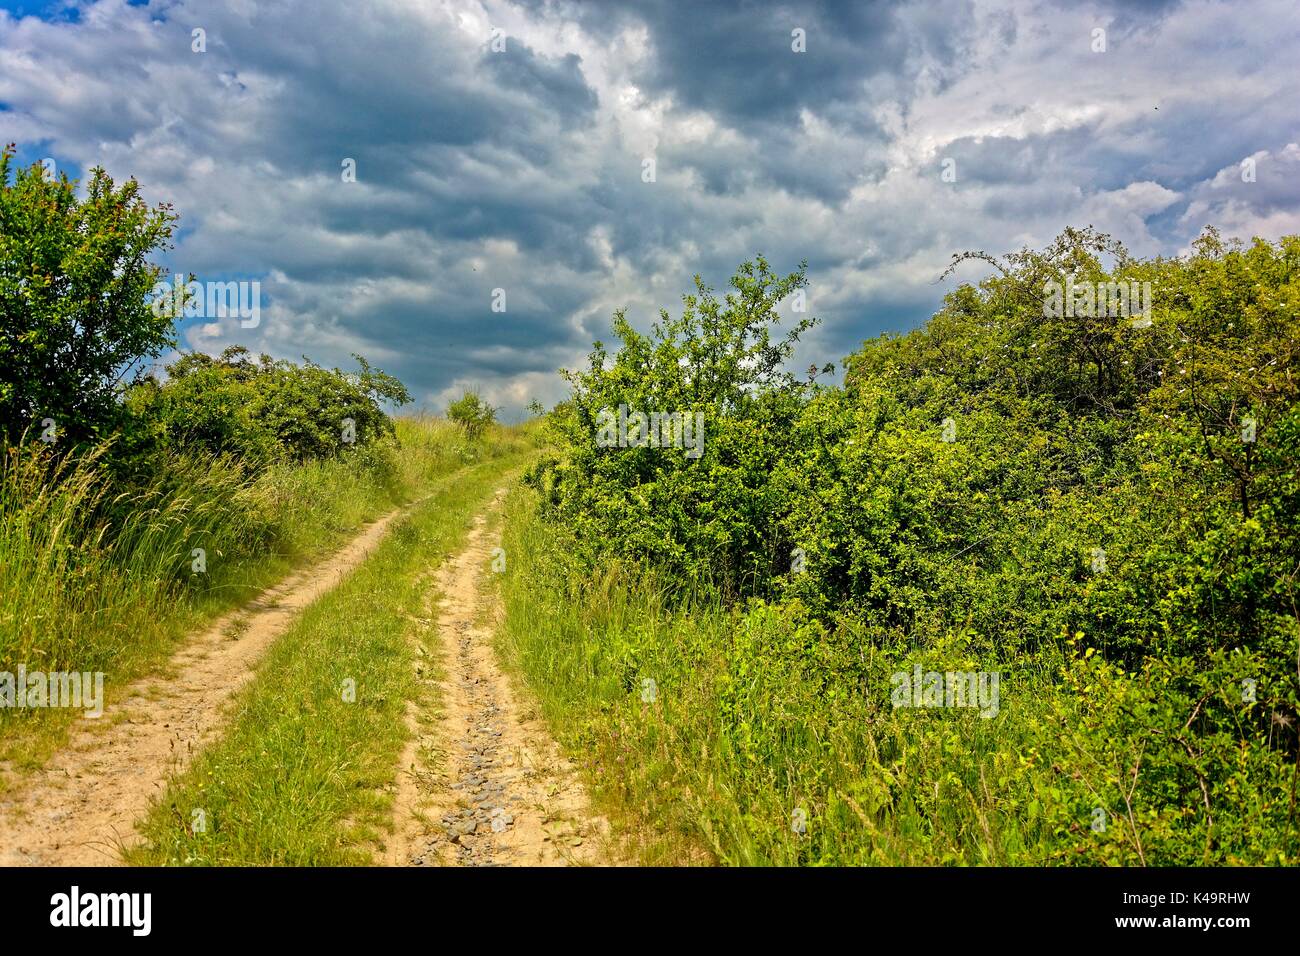 Landscape With Economic Path And Bushes Stock Photo